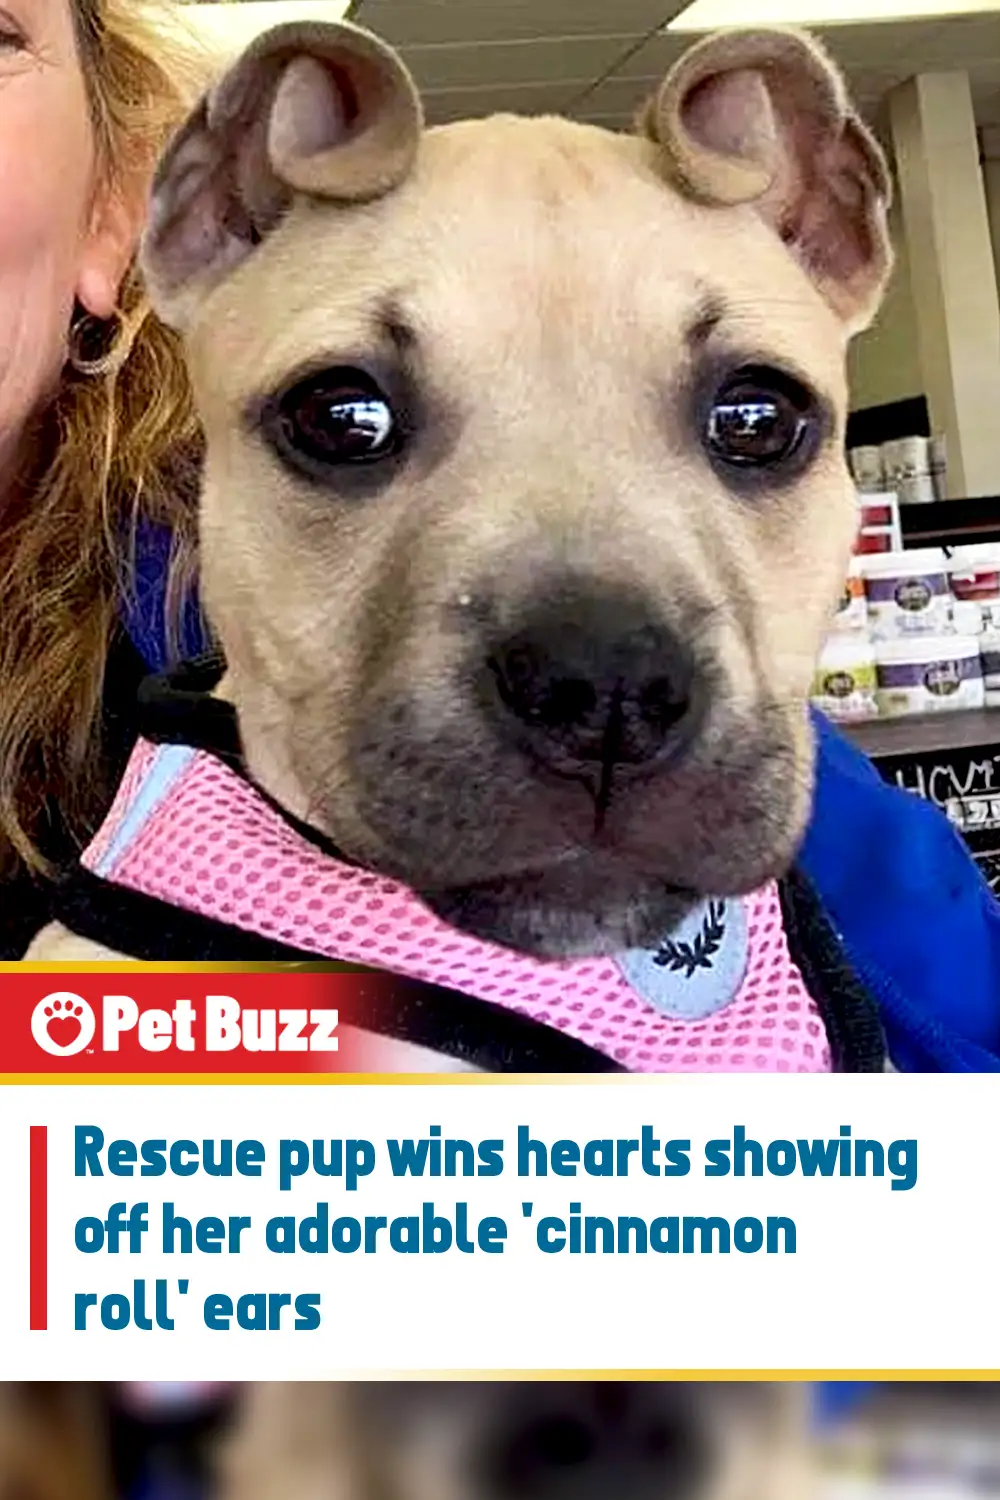 Rescue pup wins hearts showing off her adorable \'cinnamon roll\' ears